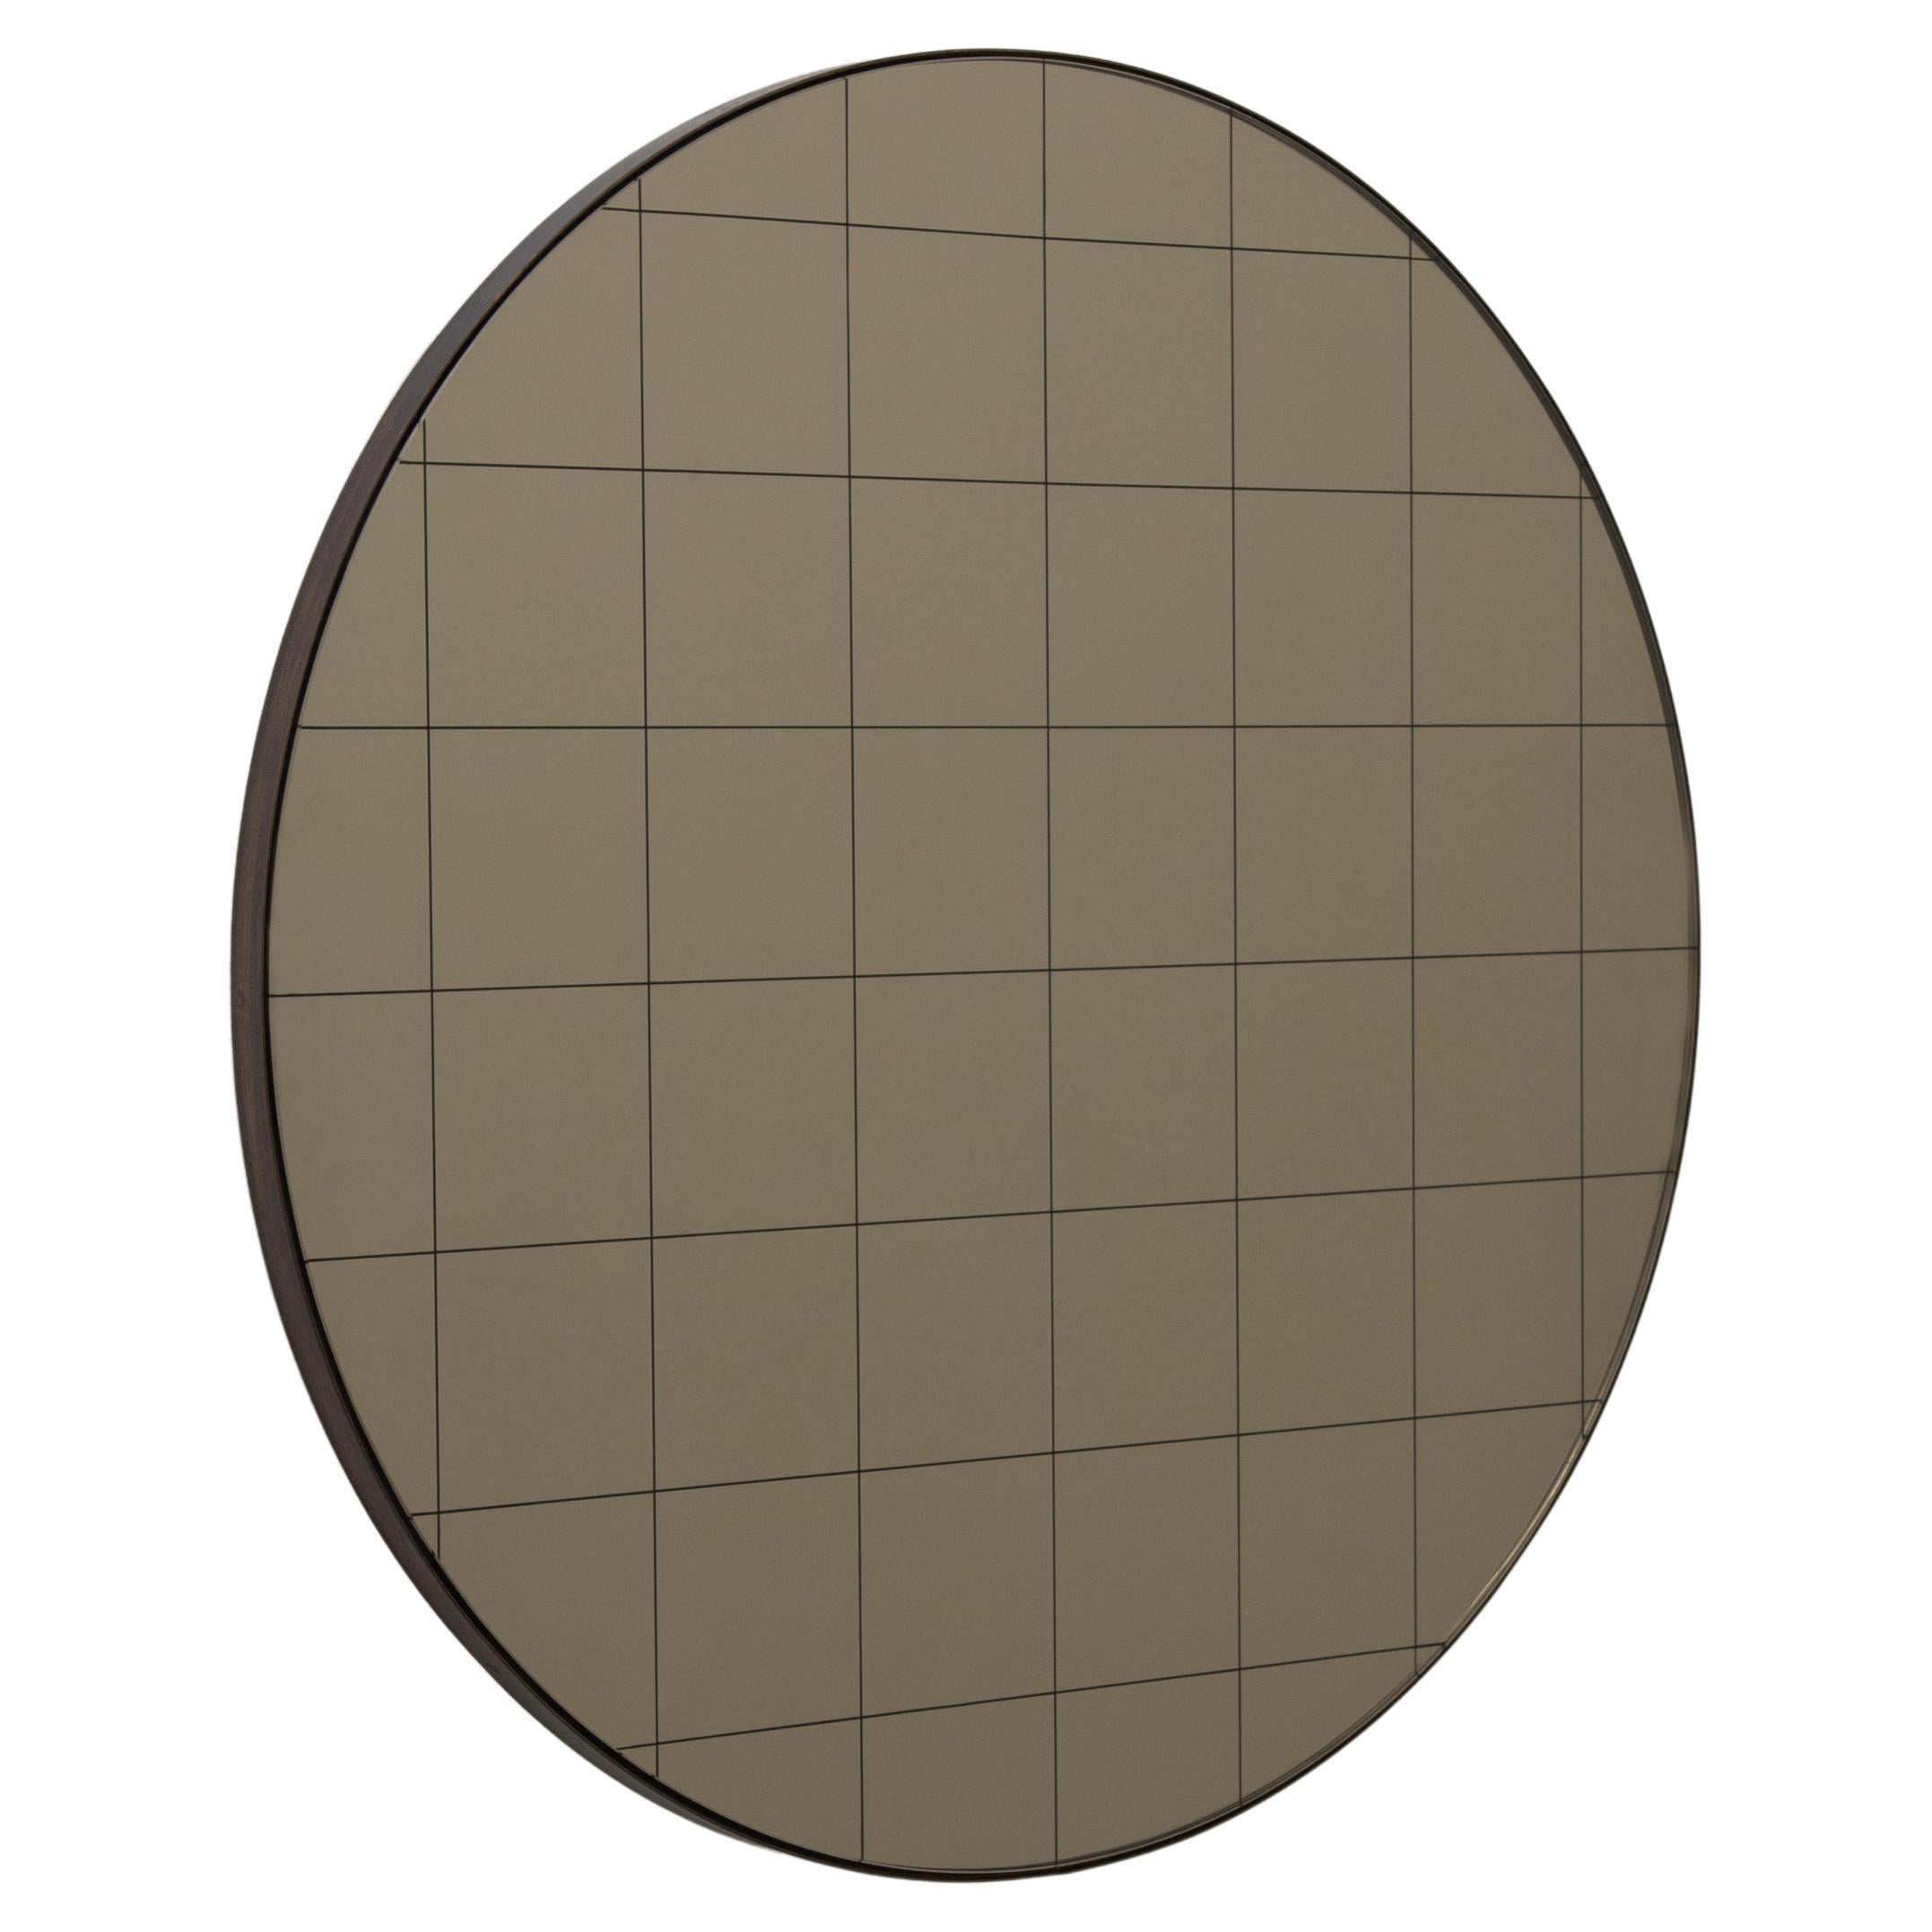 In Stock Orbis Bronze Round Mirror with Patina Frame, Medium For Sale